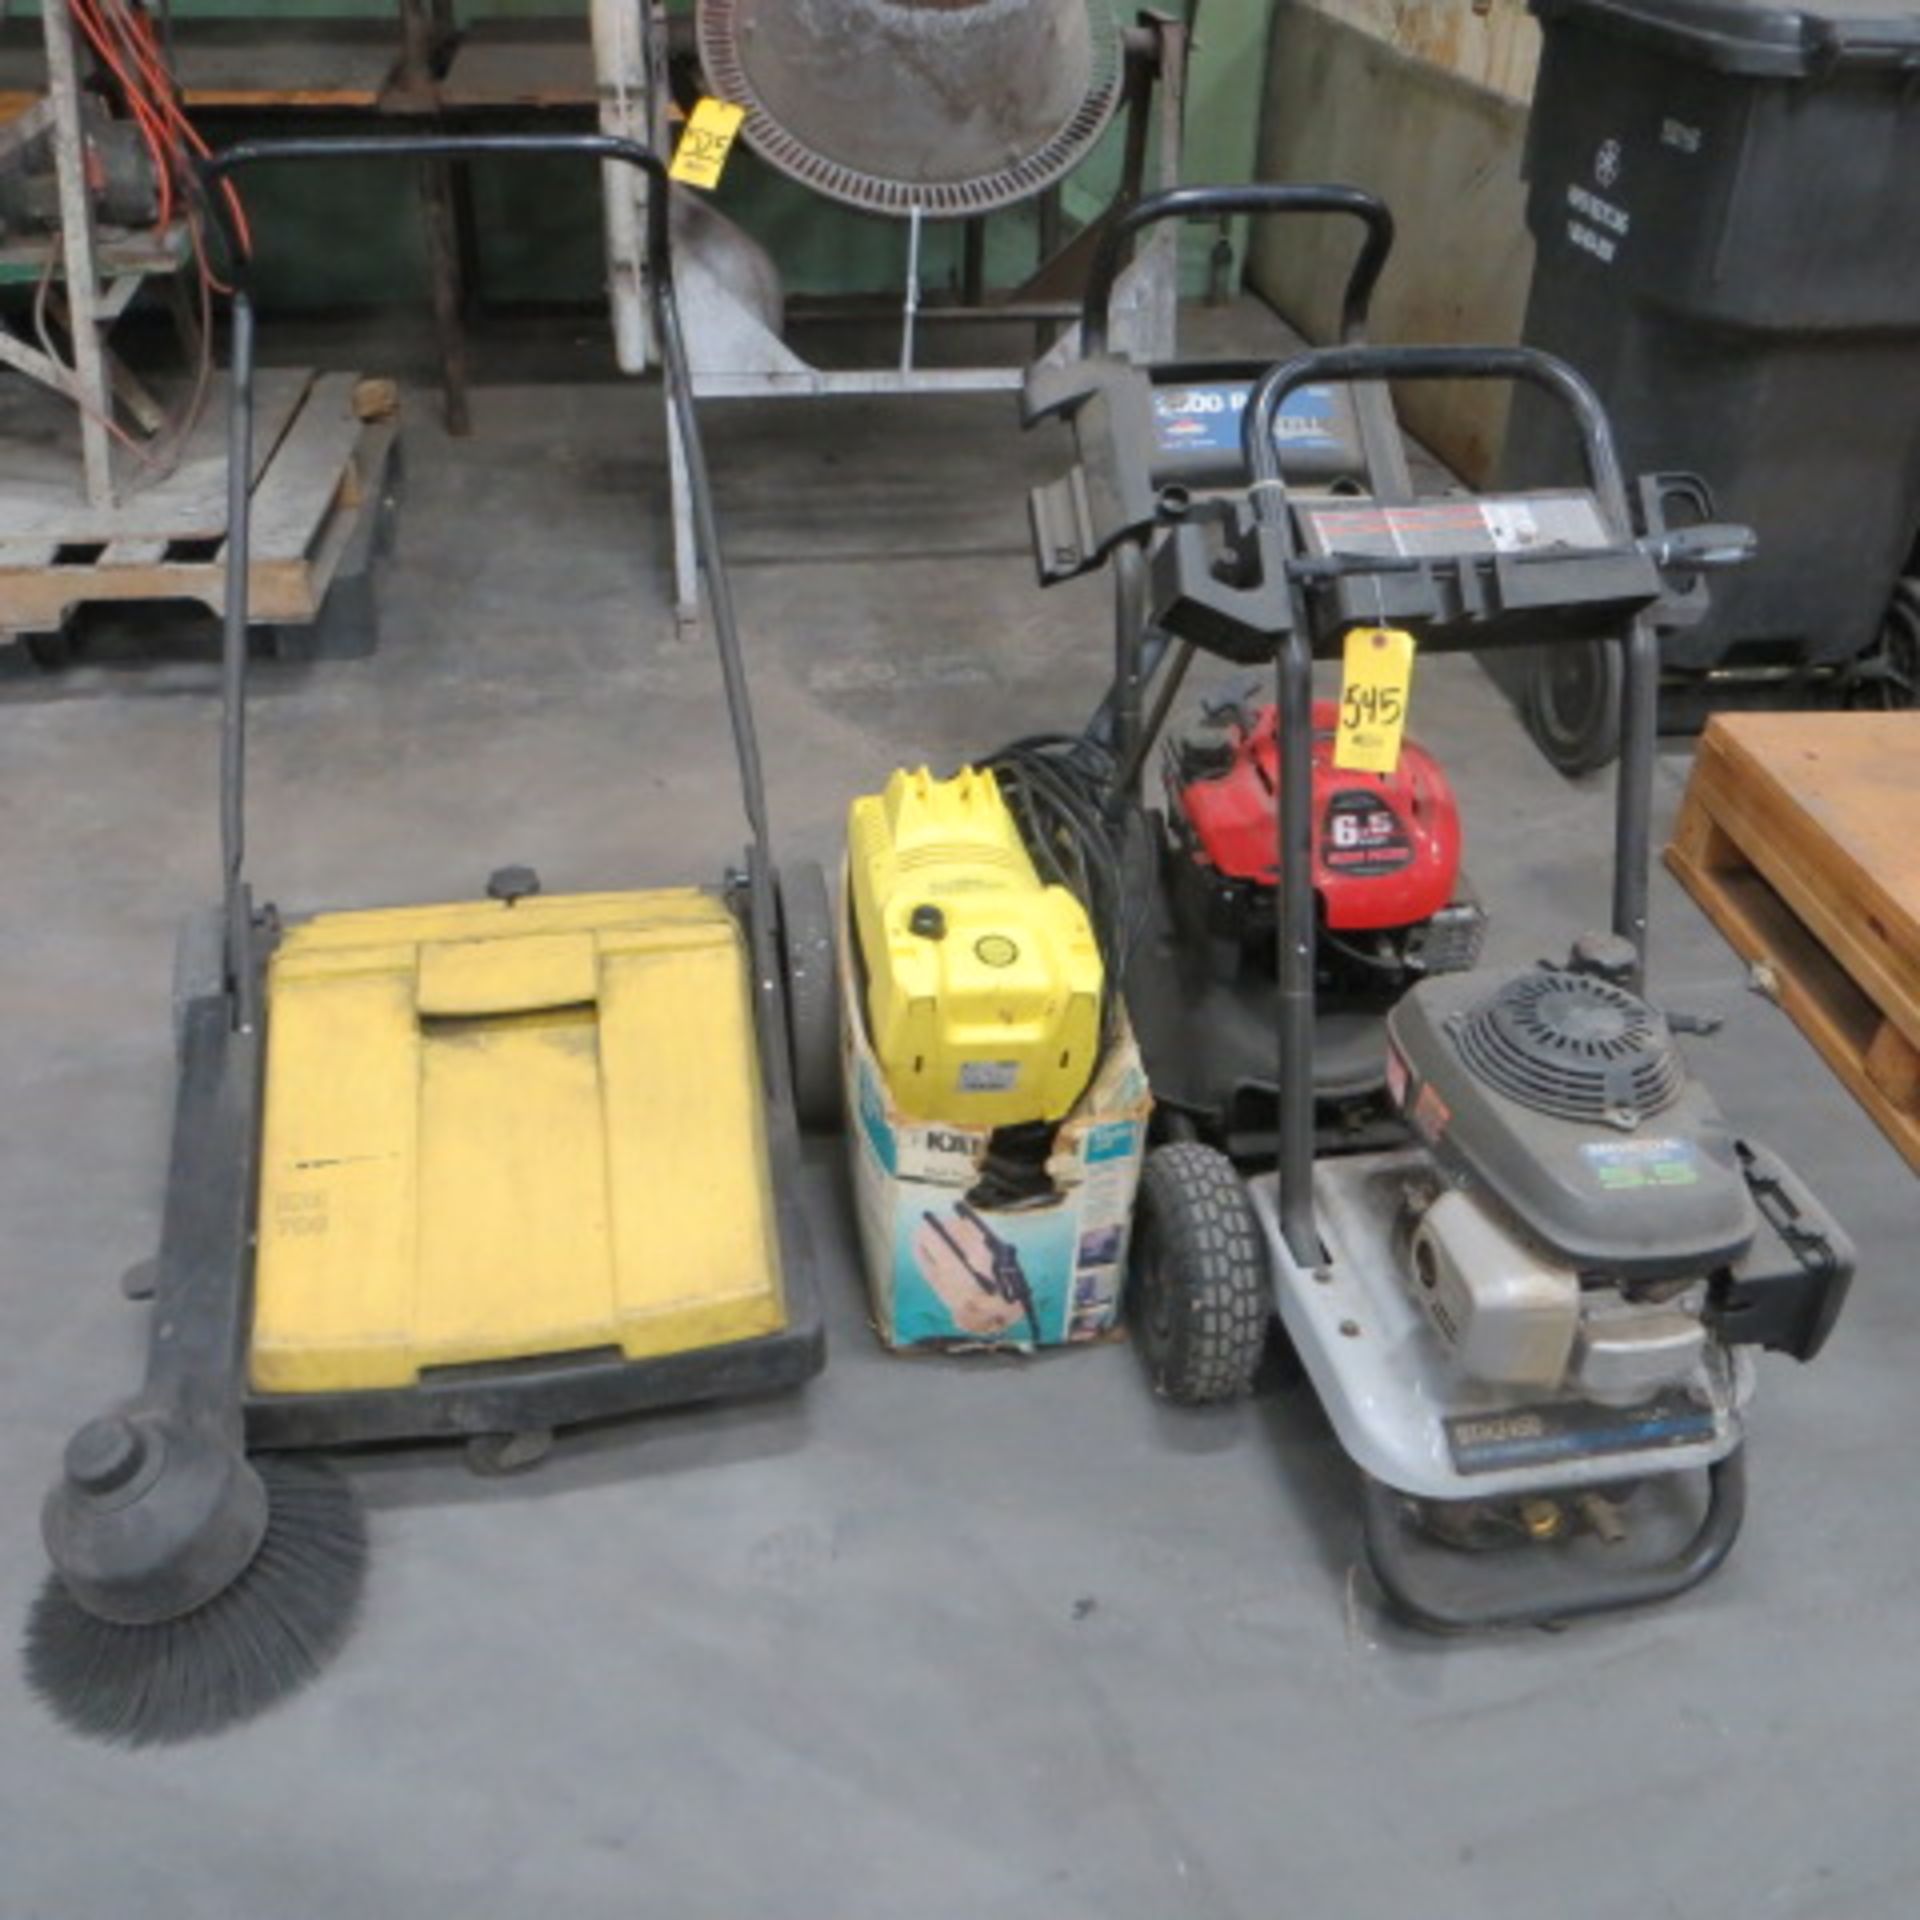 KARCHER KM700 FLOOR SWEEPER AND (3) PRESSURE WASHERS